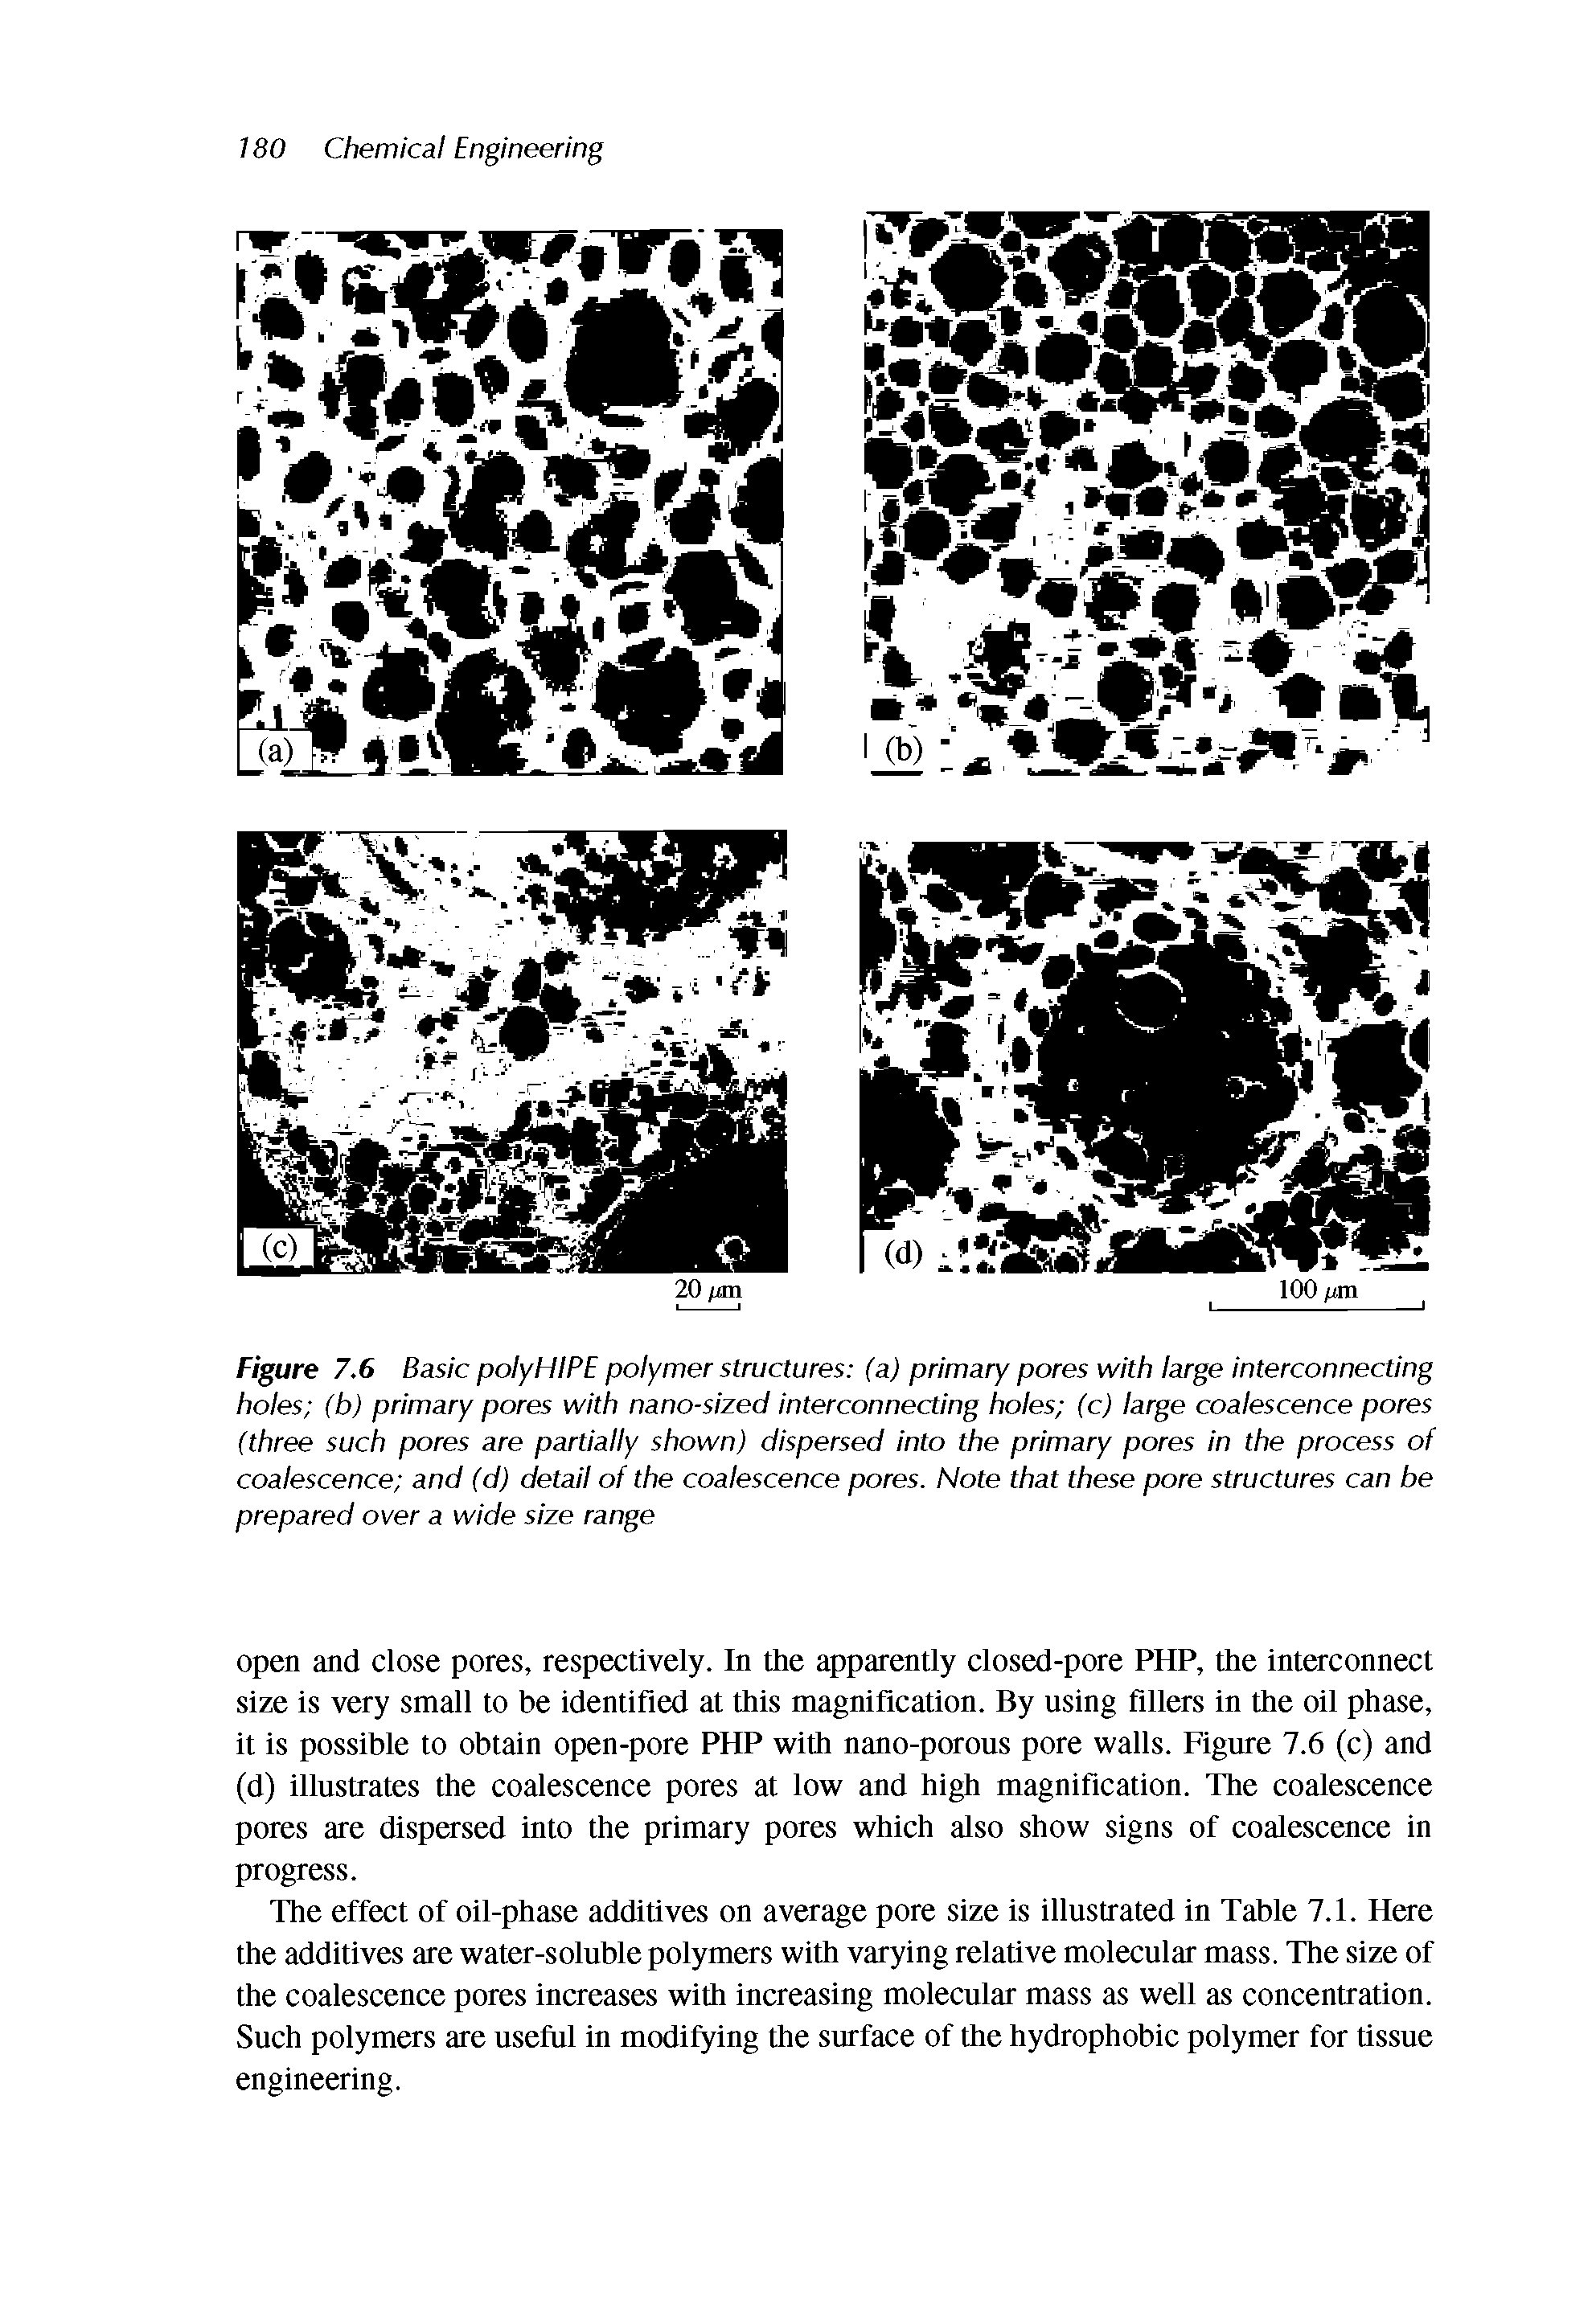 Figure 7.6 Basic polyHIPE polymer structures (a) primary pores with large interconnecting holes (b) primary pores with nano-sized interconnecting holes (c) large coalescence pores (three such pores are partially shown) dispersed into the primary pores in the process of coalescence and (d) detail of the coalescence pores. Note that these pore structures can be prepared over a wide size range...